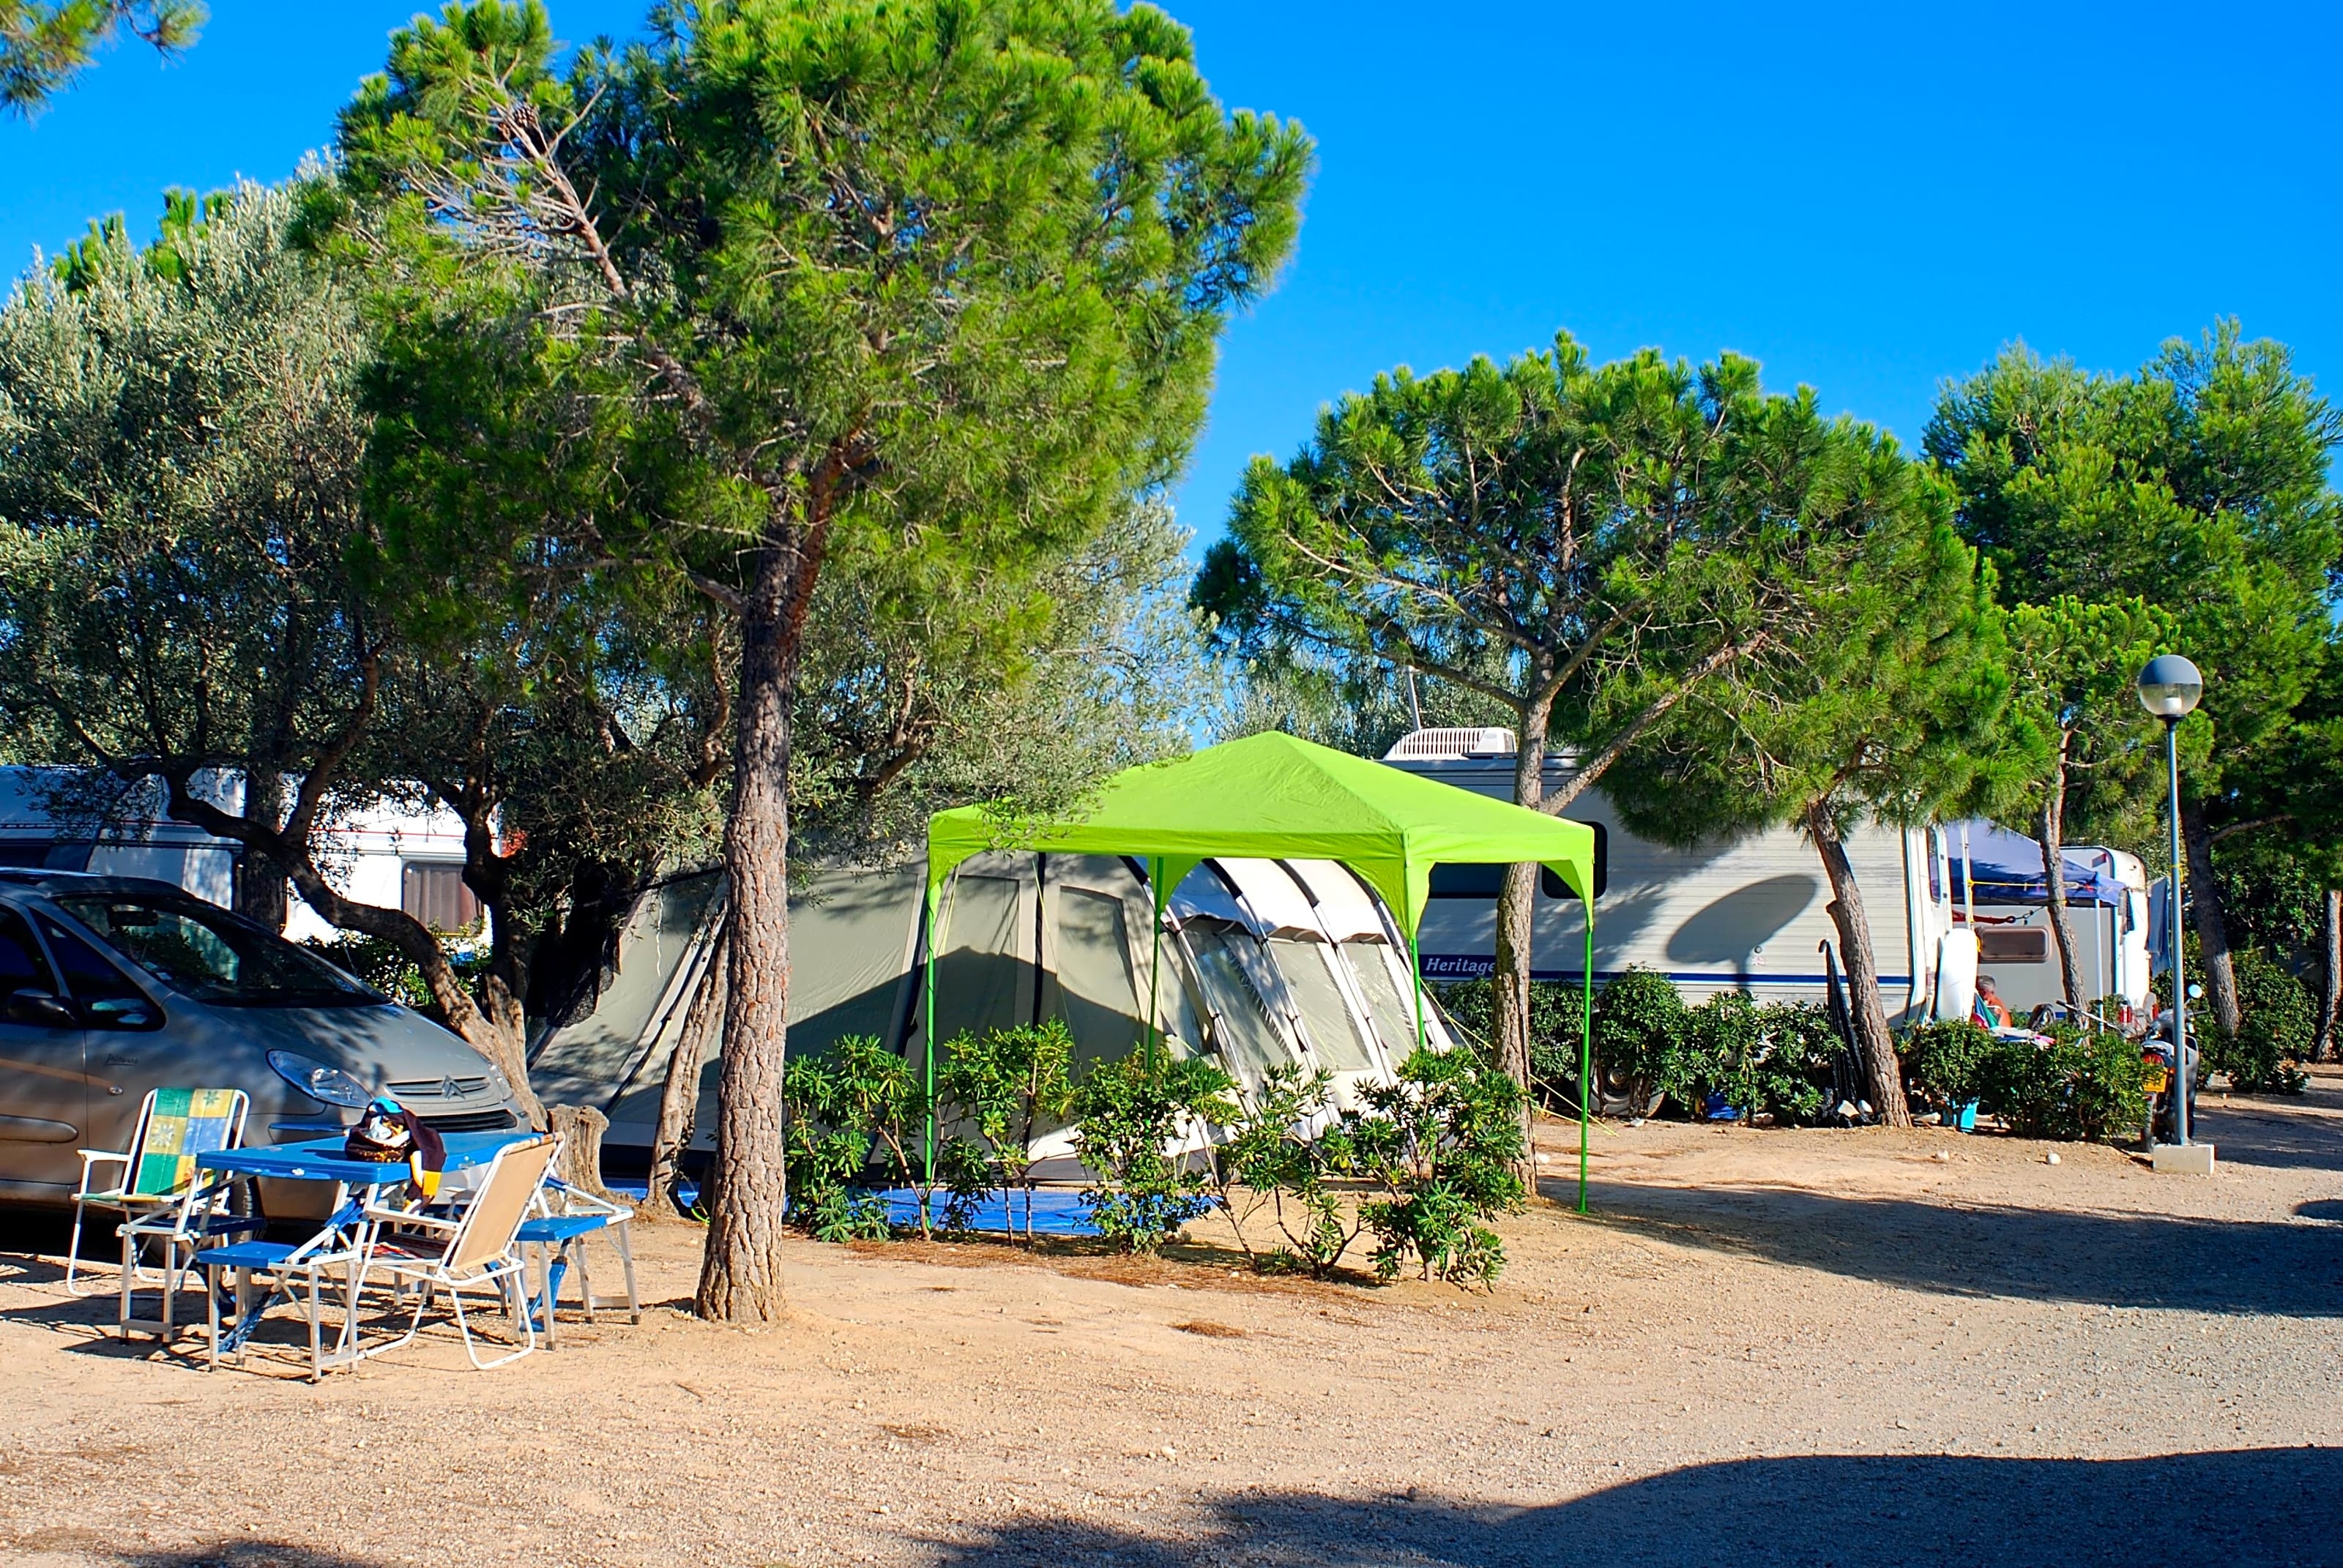 Camping Ametlla, L'Ametlla de Mar - Updated 2019 prices - Pitchup®